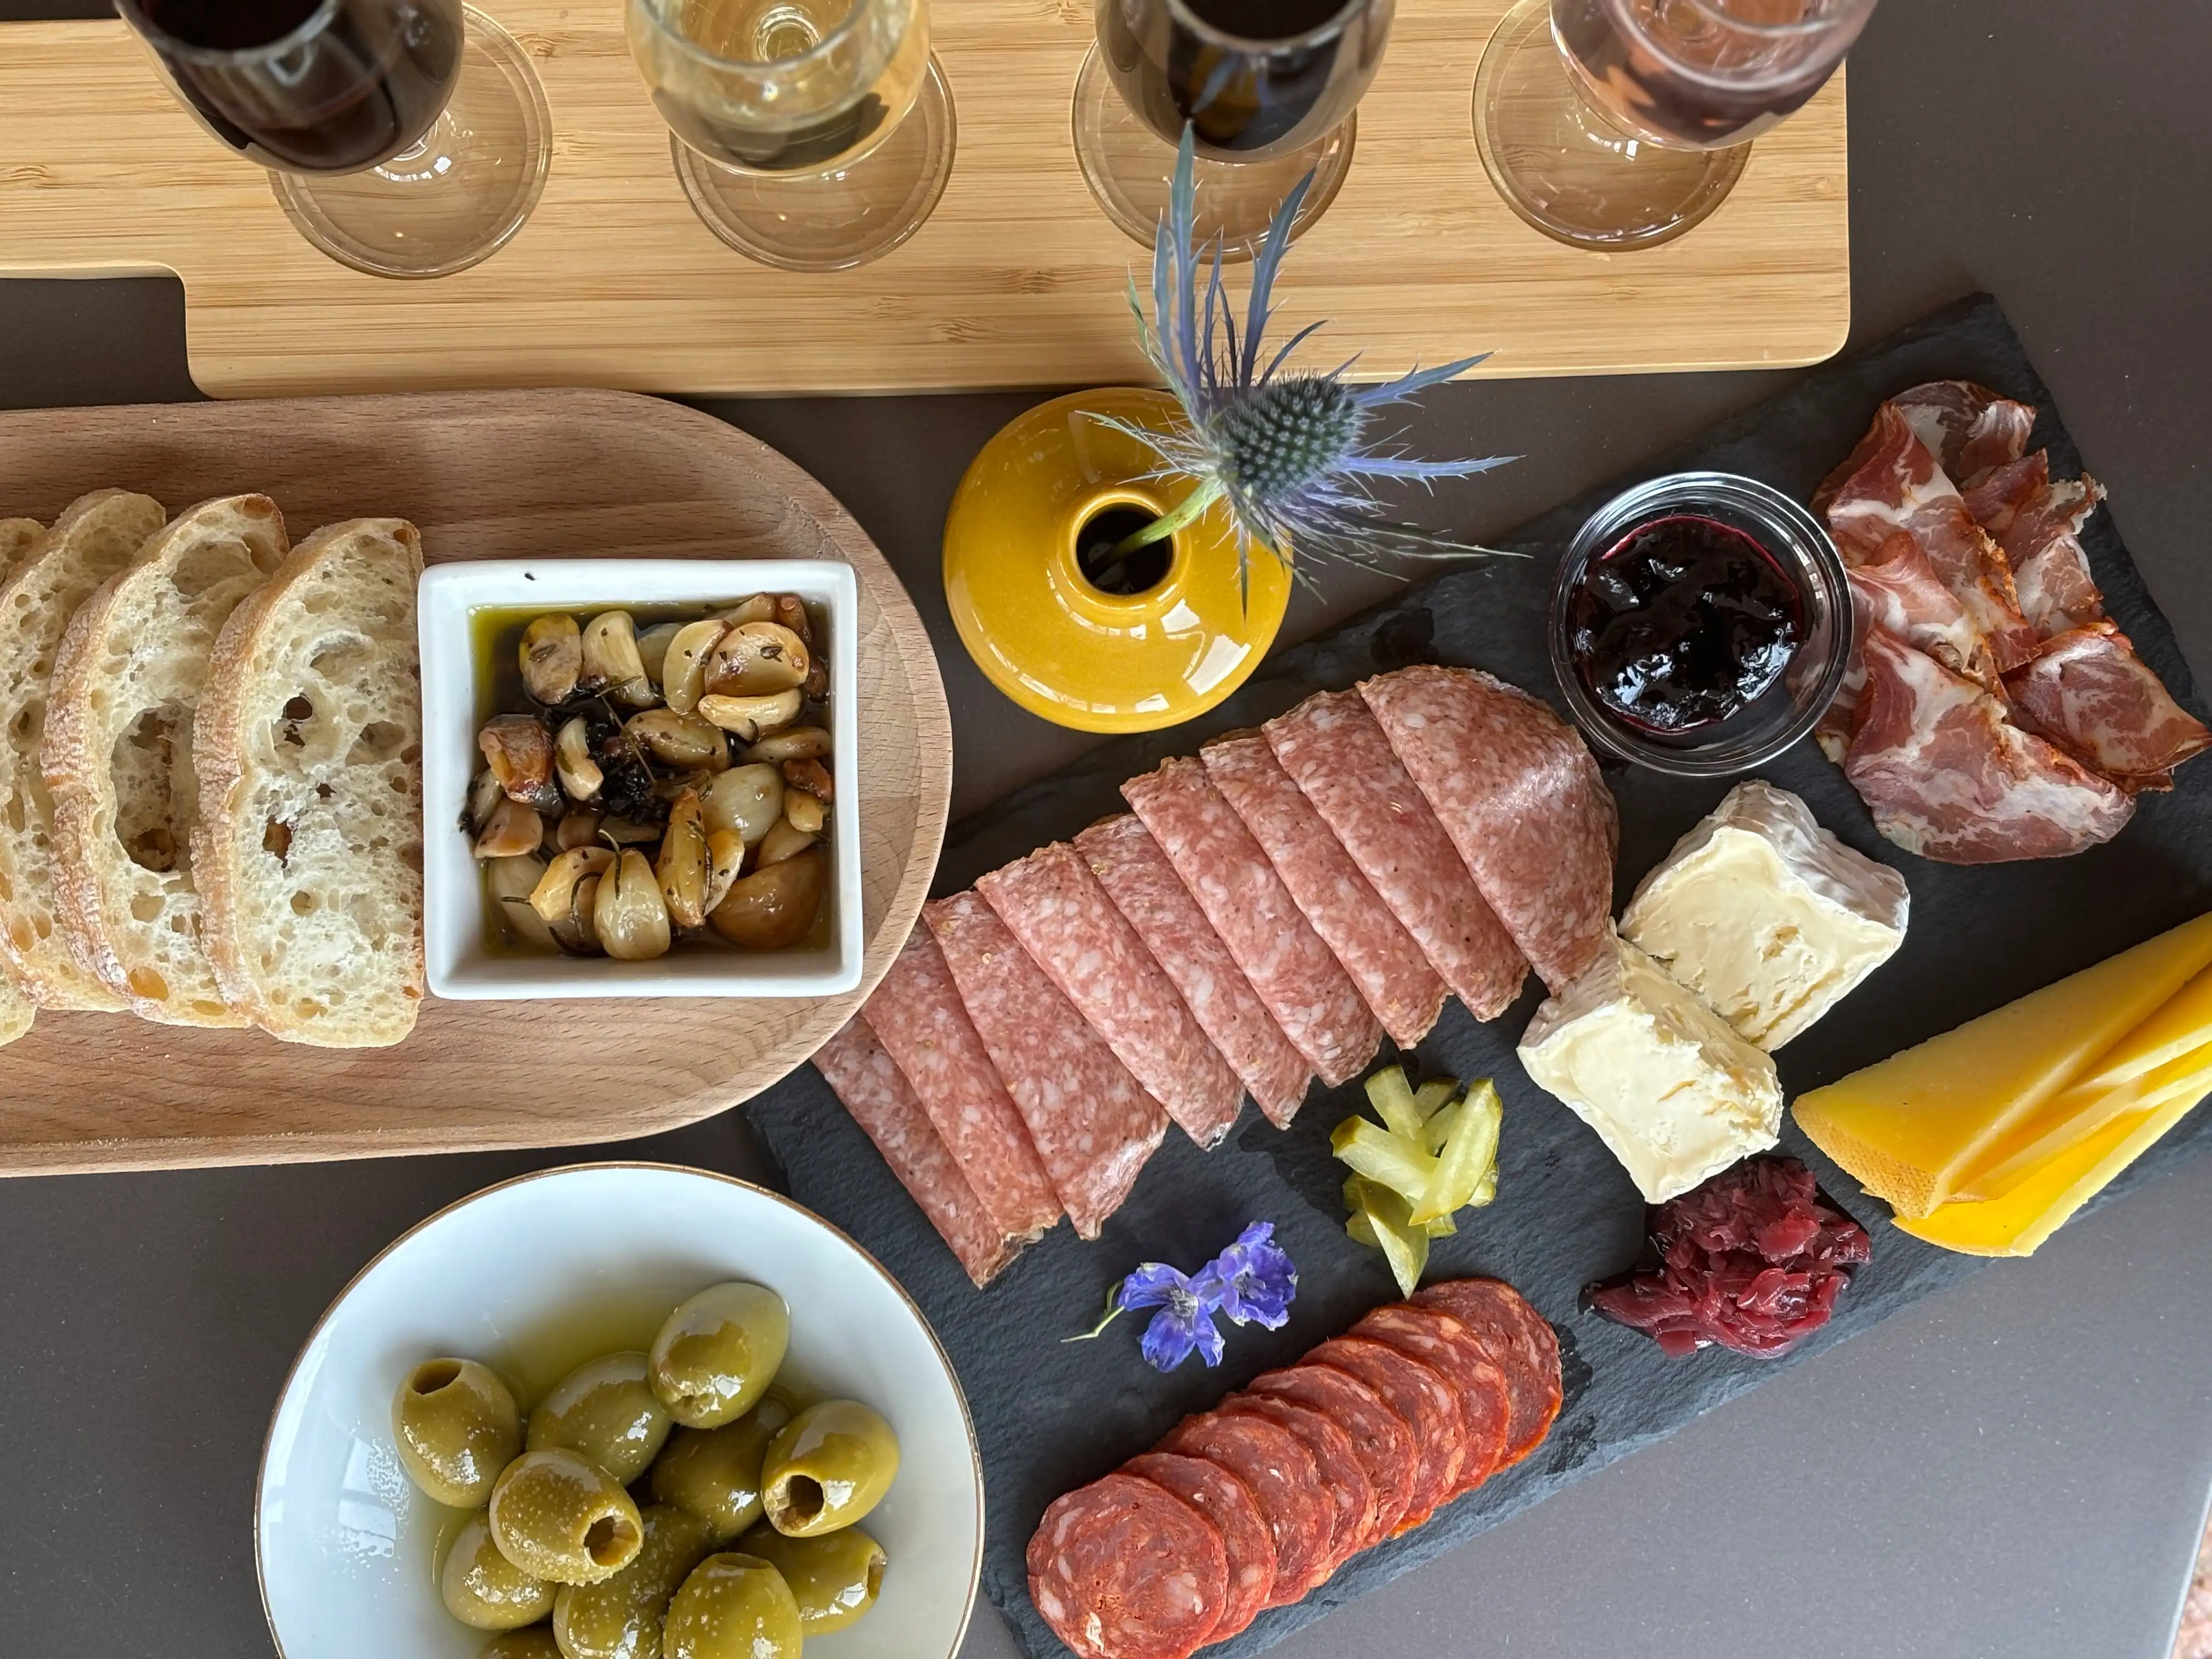 A charcuterie board and wine